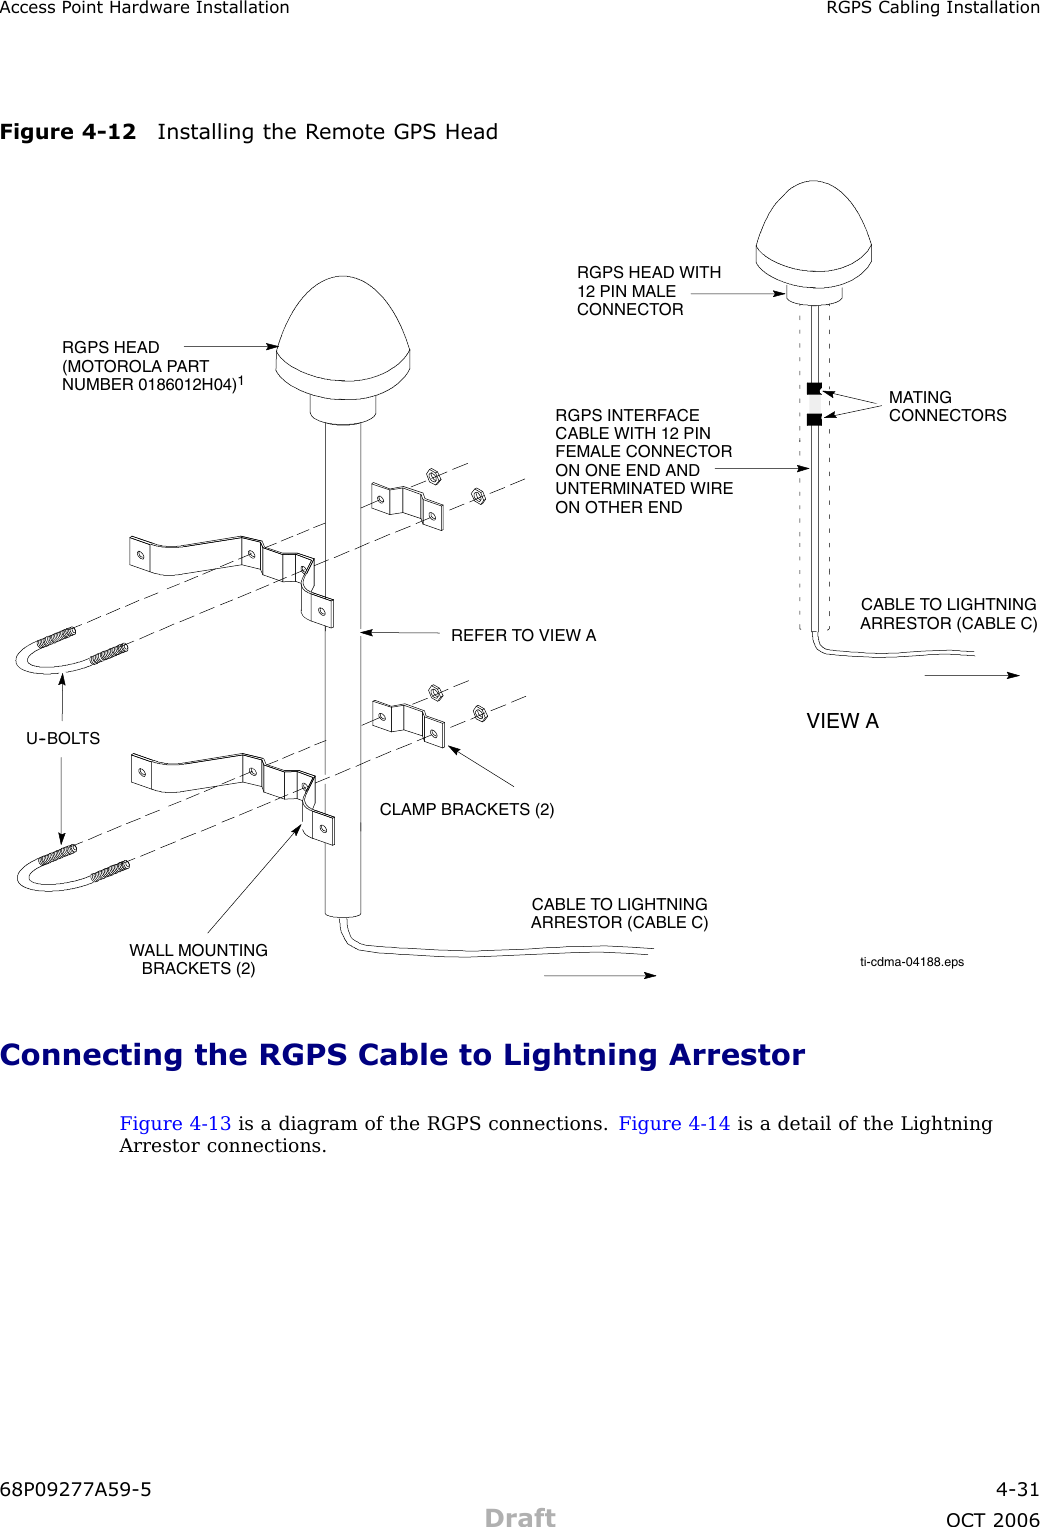 Access P oint Hardw are Installation RGPS Cabling InstallationFigure 4 -12 Installing the R emote GPS Headti-cdma-04188.epsWALL MOUNTINGBRACKETS (2)CLAMP BRACKETS (2)U--BOLTSCABLE TO LIGHTNINGARRESTOR (CABLE C)REFER TO VIEW ARGPS HEAD WITH12 PIN MALECONNECTORMATINGCONNECTORSRGPS INTERFACECABLE WITH 12 PINFEMALE CONNECTORON ONE END ANDUNTERMINATED WIREON OTHER ENDVIEW ARGPS HEAD(MOTOROLA PARTNUMBER 0186012H04)1CABLE TO LIGHTNINGARRESTOR (CABLE C)Connecting the RGPS Cable to Lightning ArrestorFigure 4 -13 is a diagram of the RGPS connections. Figure 4 -14 is a detail of the LightningArrestor connections.68P09277A59 -5 4 -31Draft OCT 2006